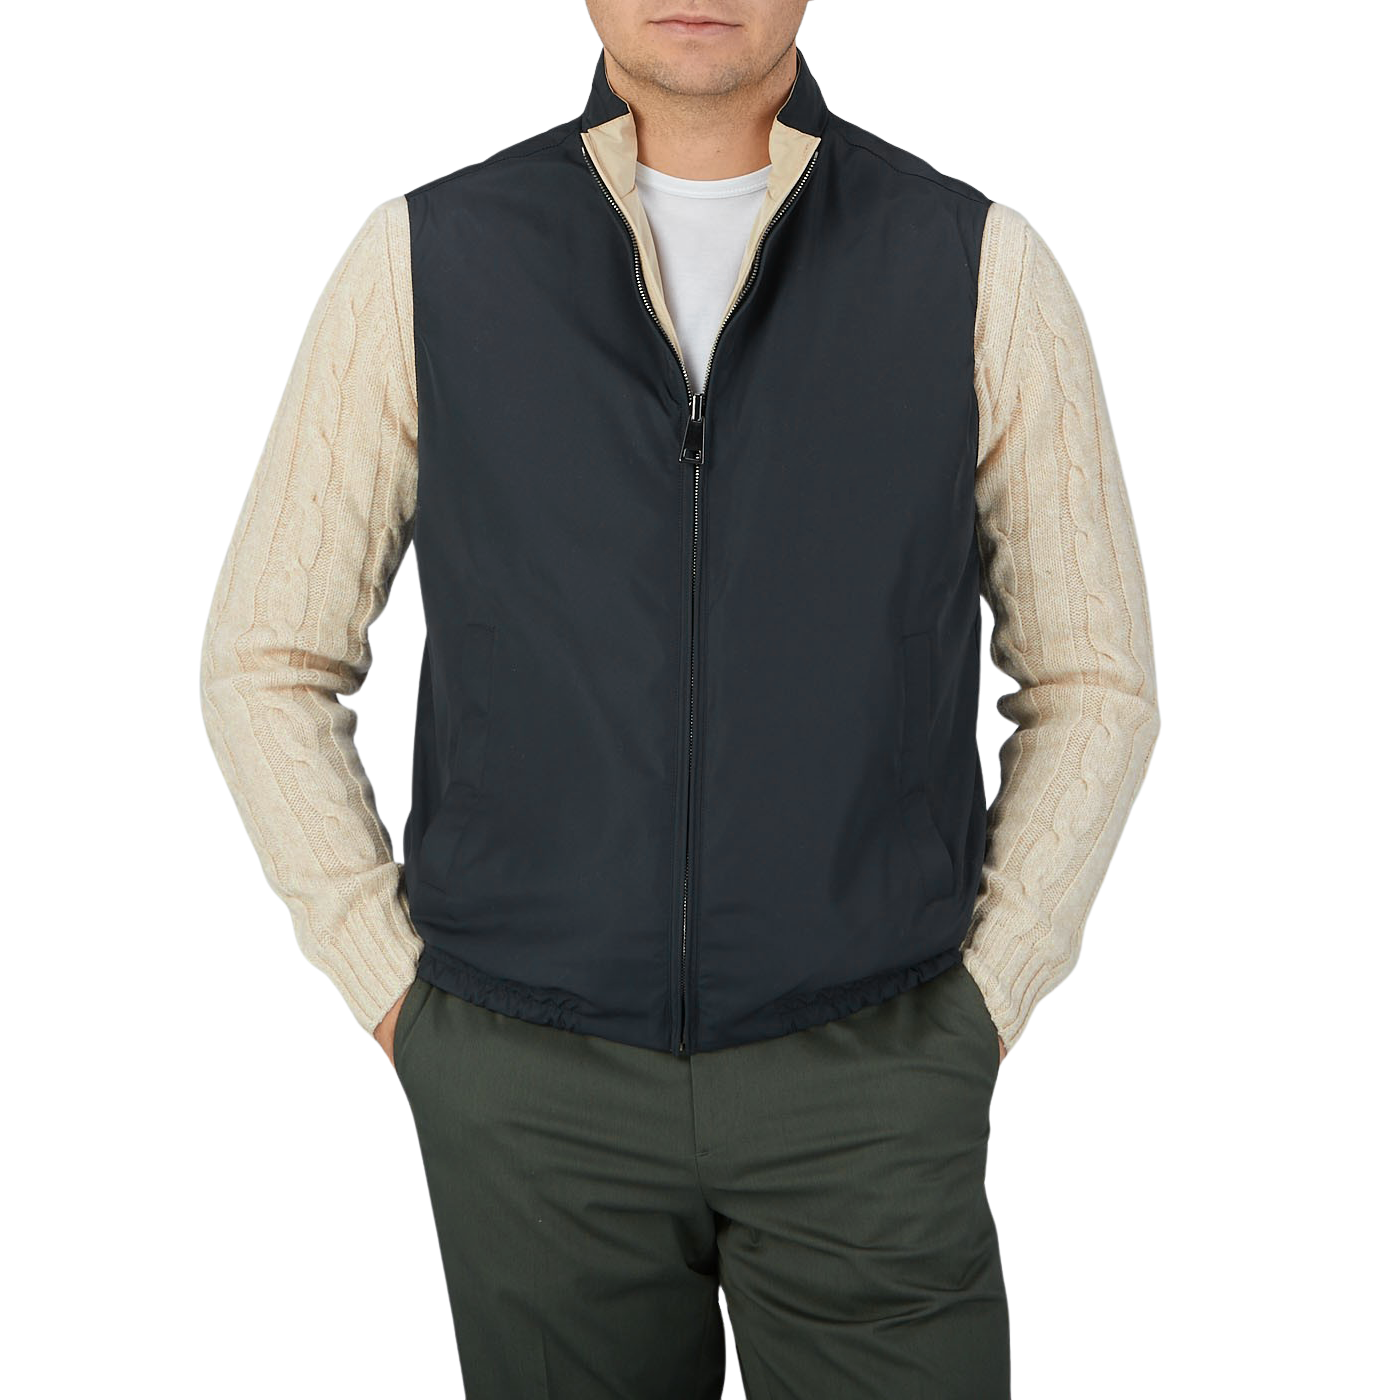 A Canali man with his hands in his pockets wearing the Navy Blue Beige Reversible Technical Gilet.